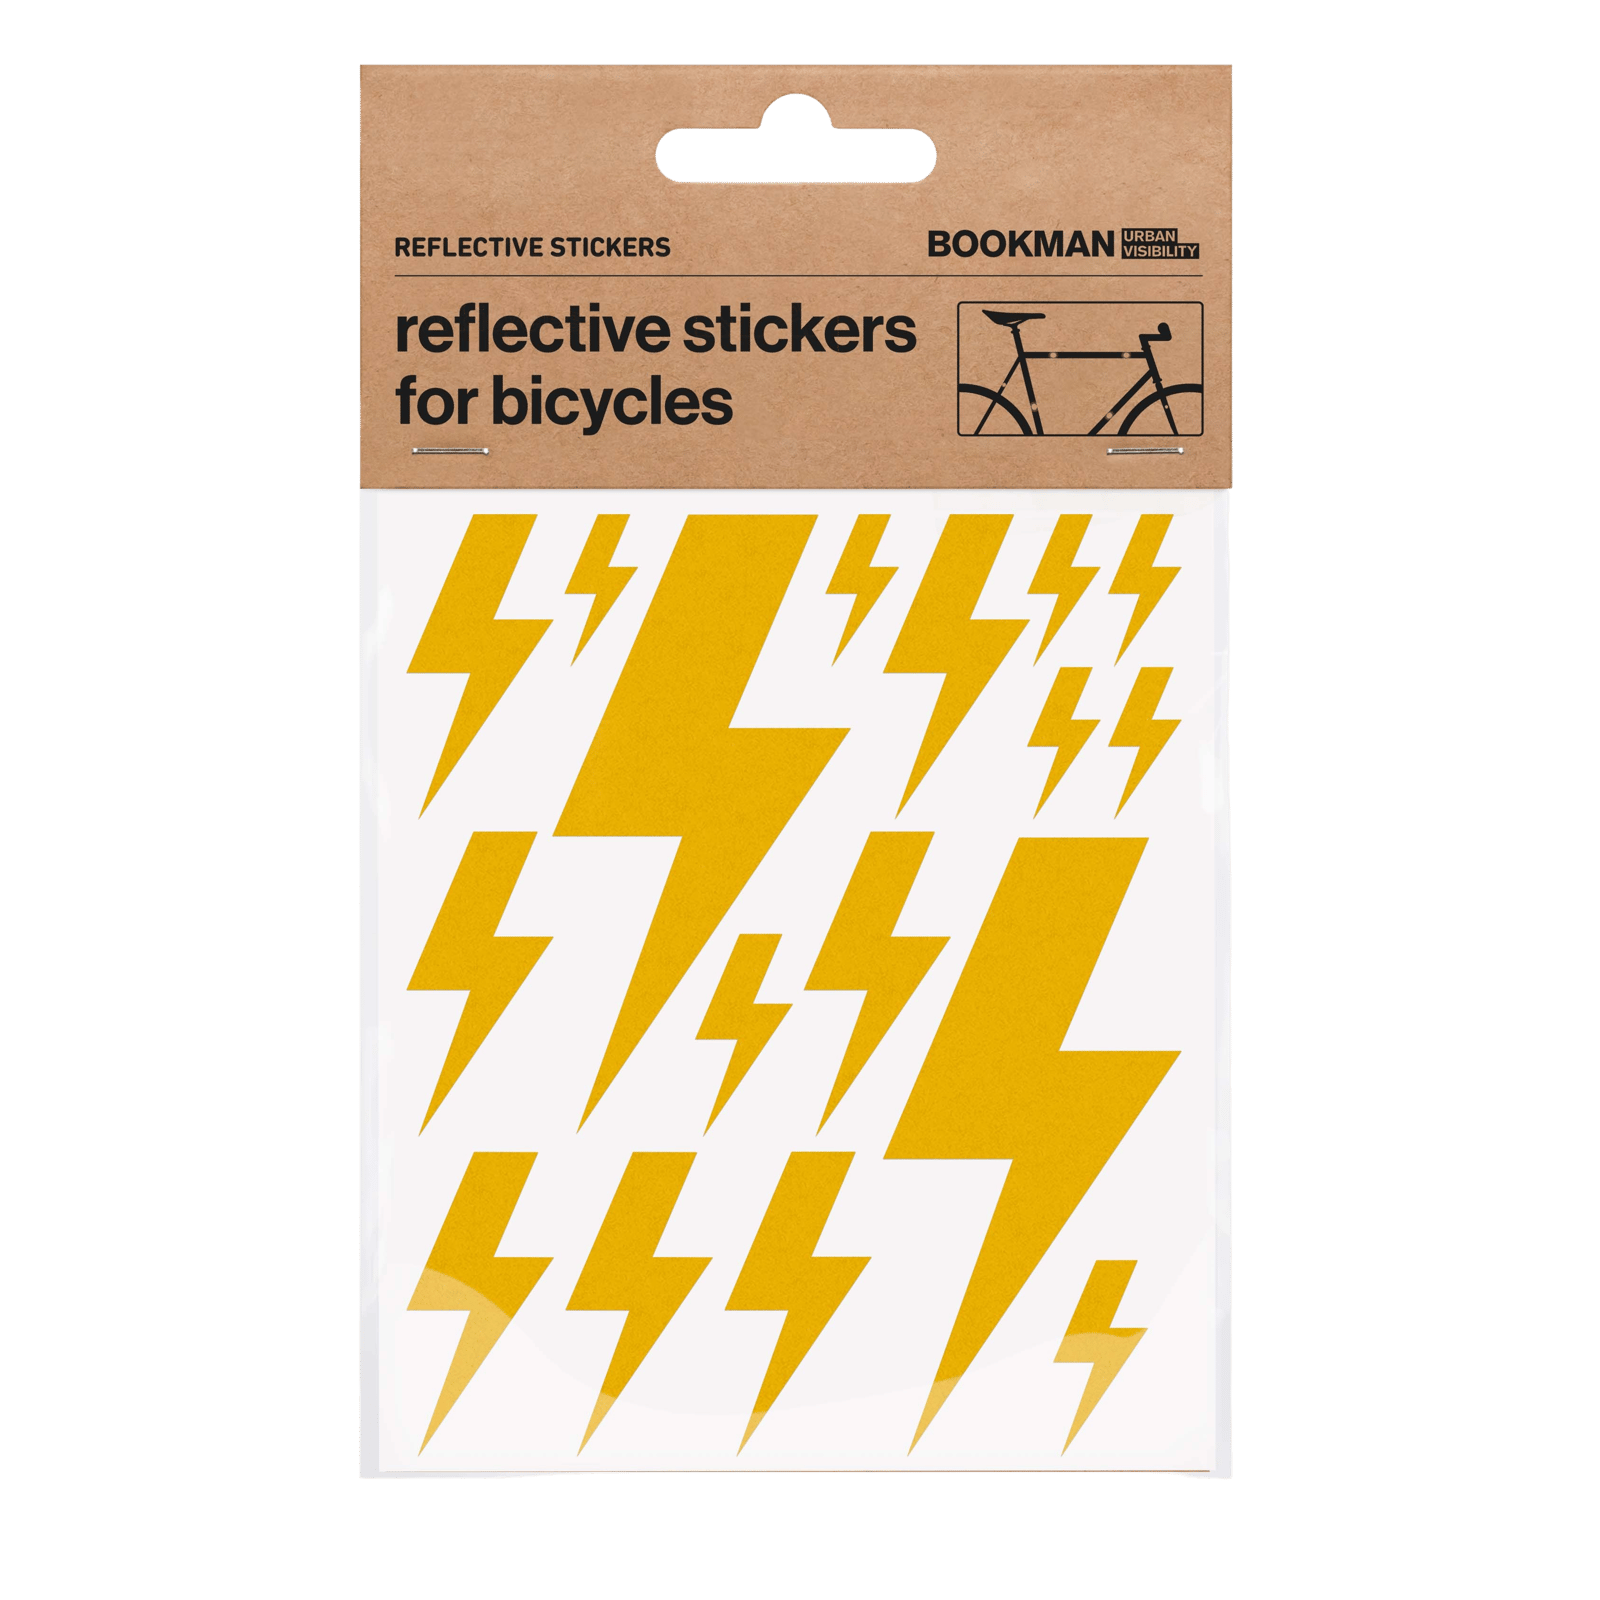 Bookman Urban Visibility Reflective Bicycle Stickers Flash Yellow 1 st